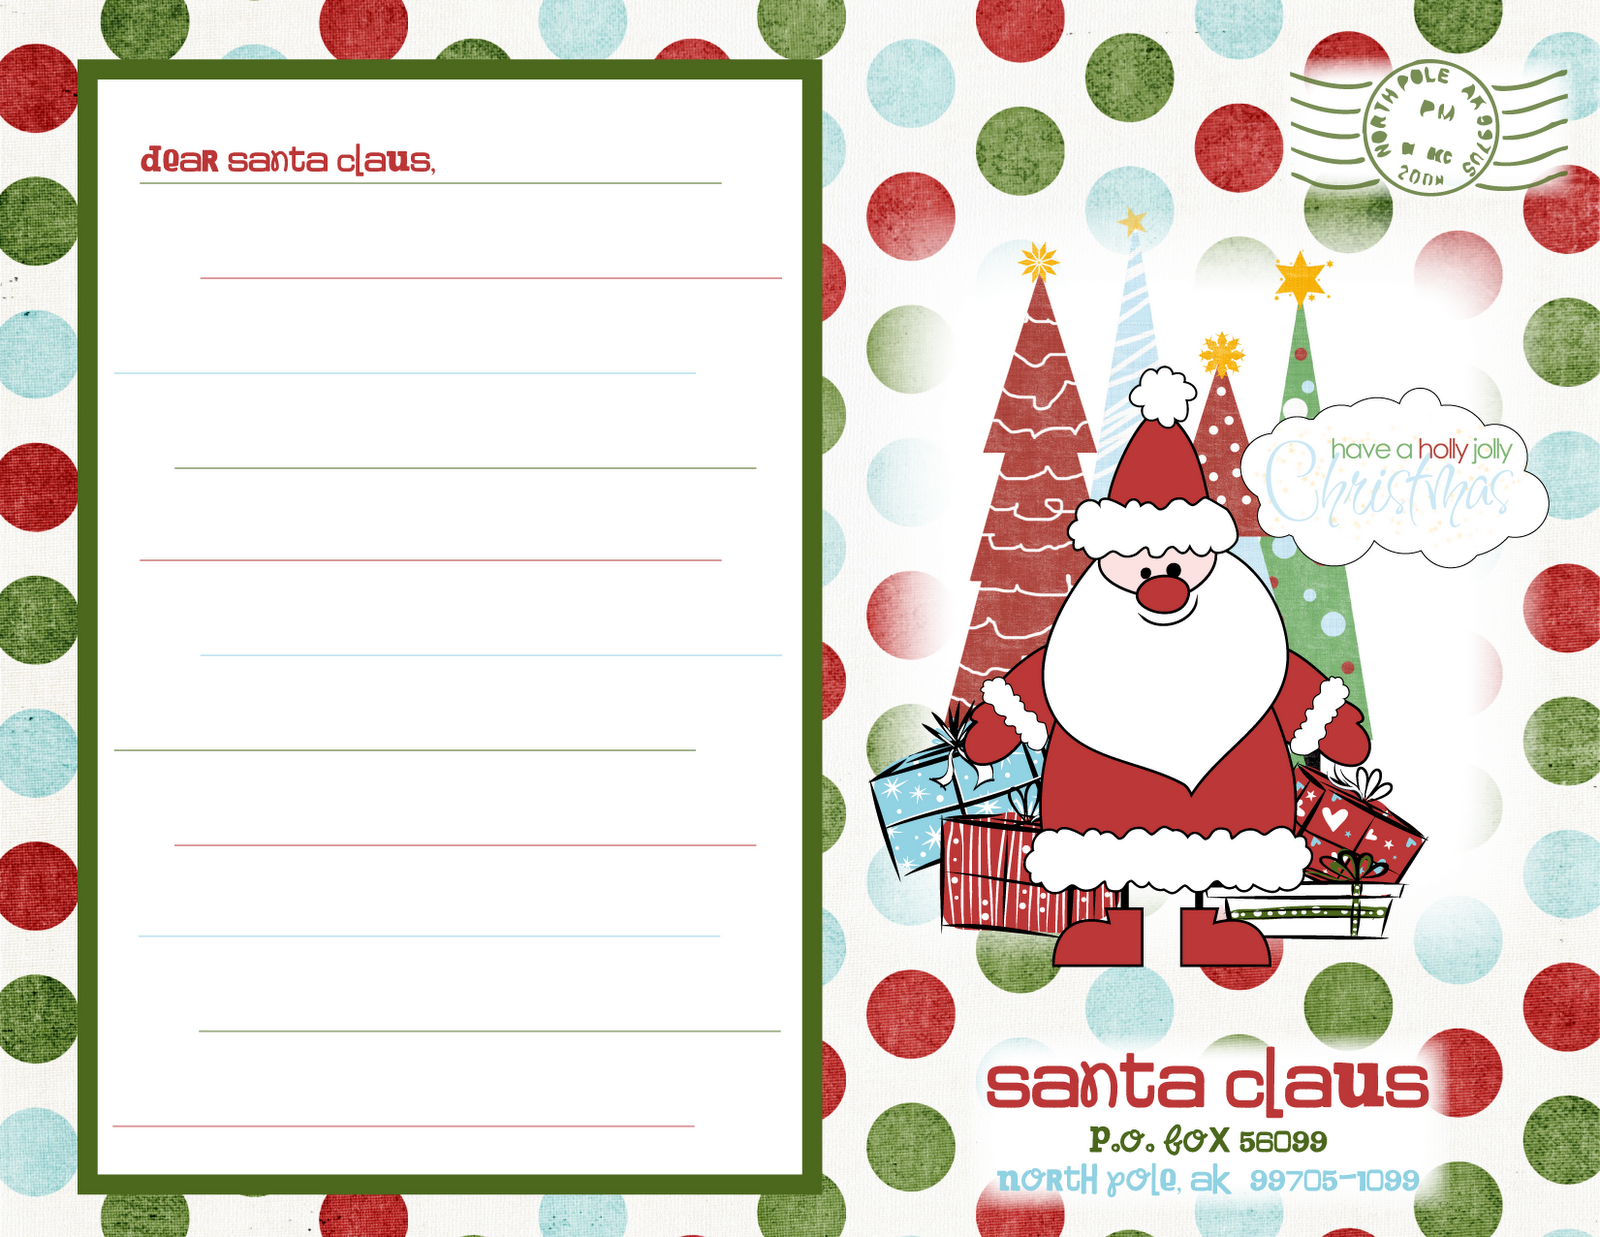 Where can you find free Santa letter templates?